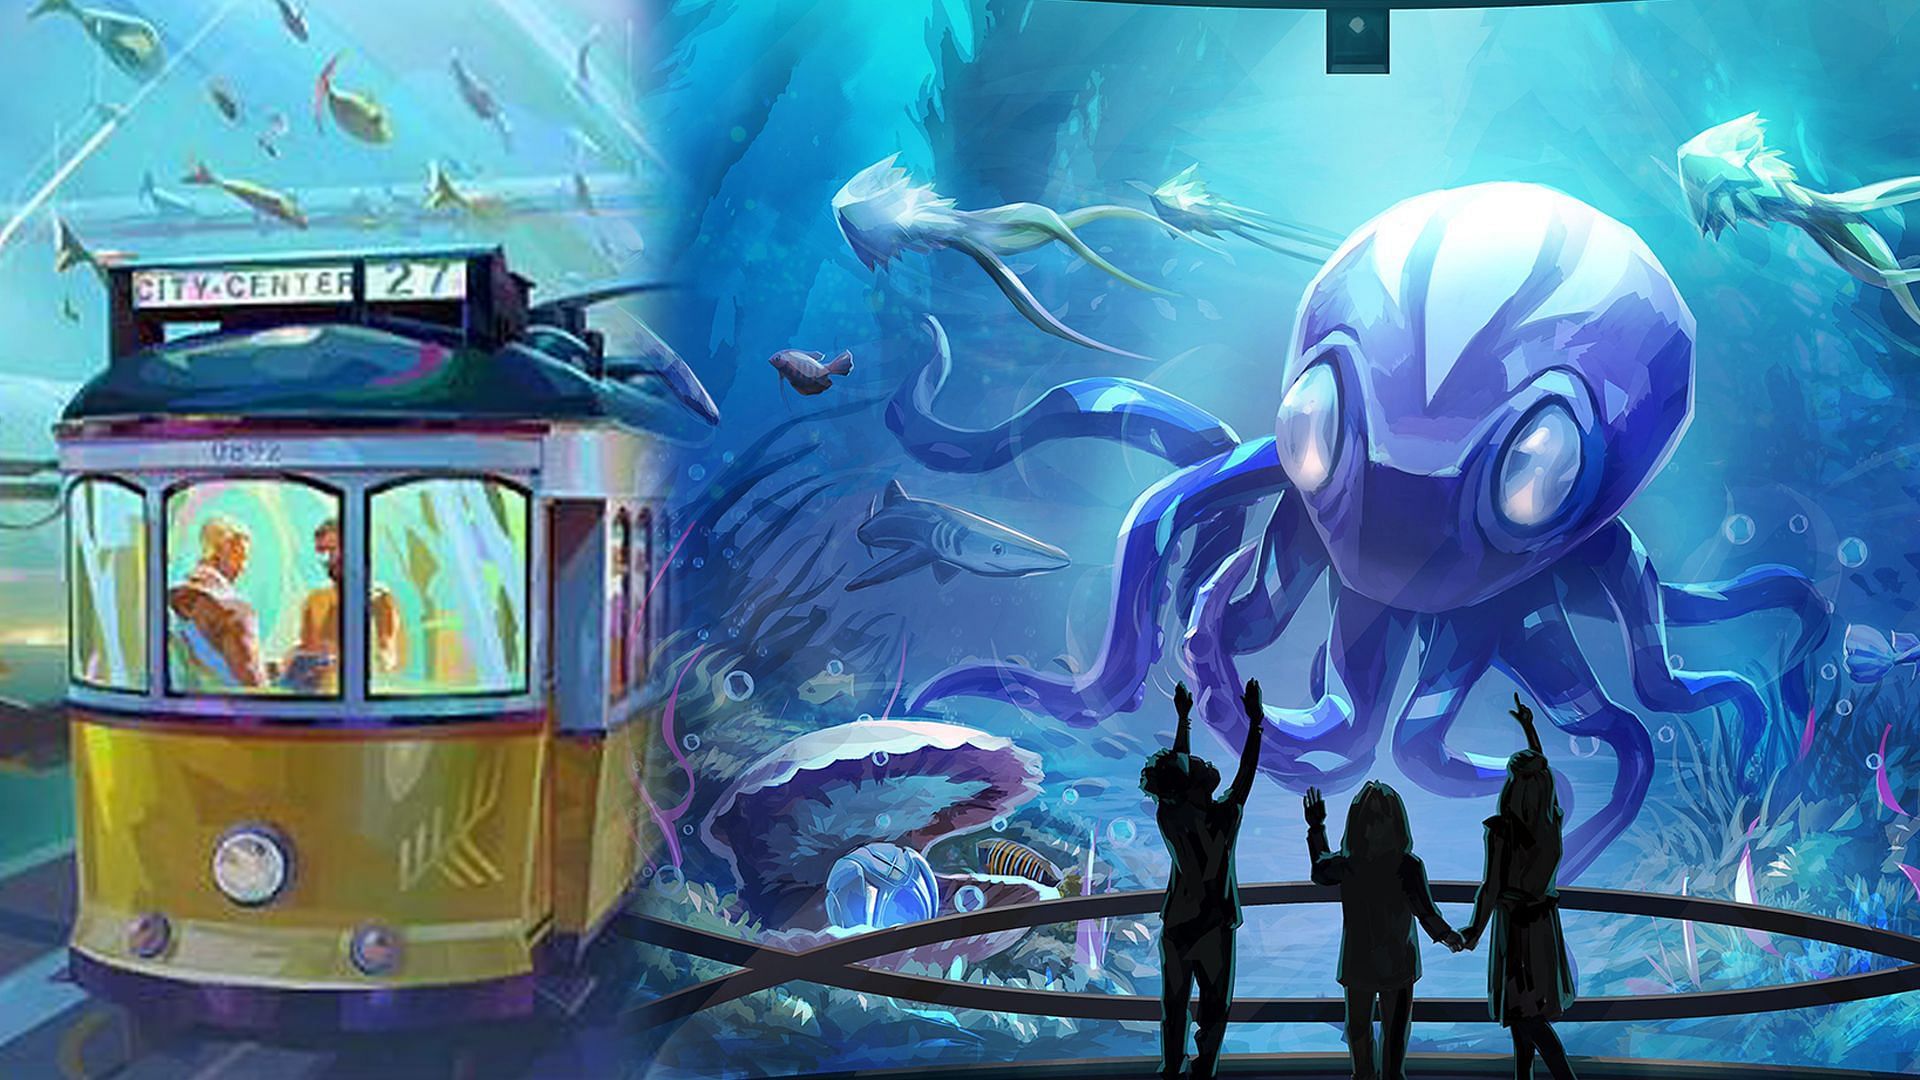 Aquarium teaser hints at an underwater theme for Valorant&#039;s new Portugal based map. (Image via Sportskeeda)